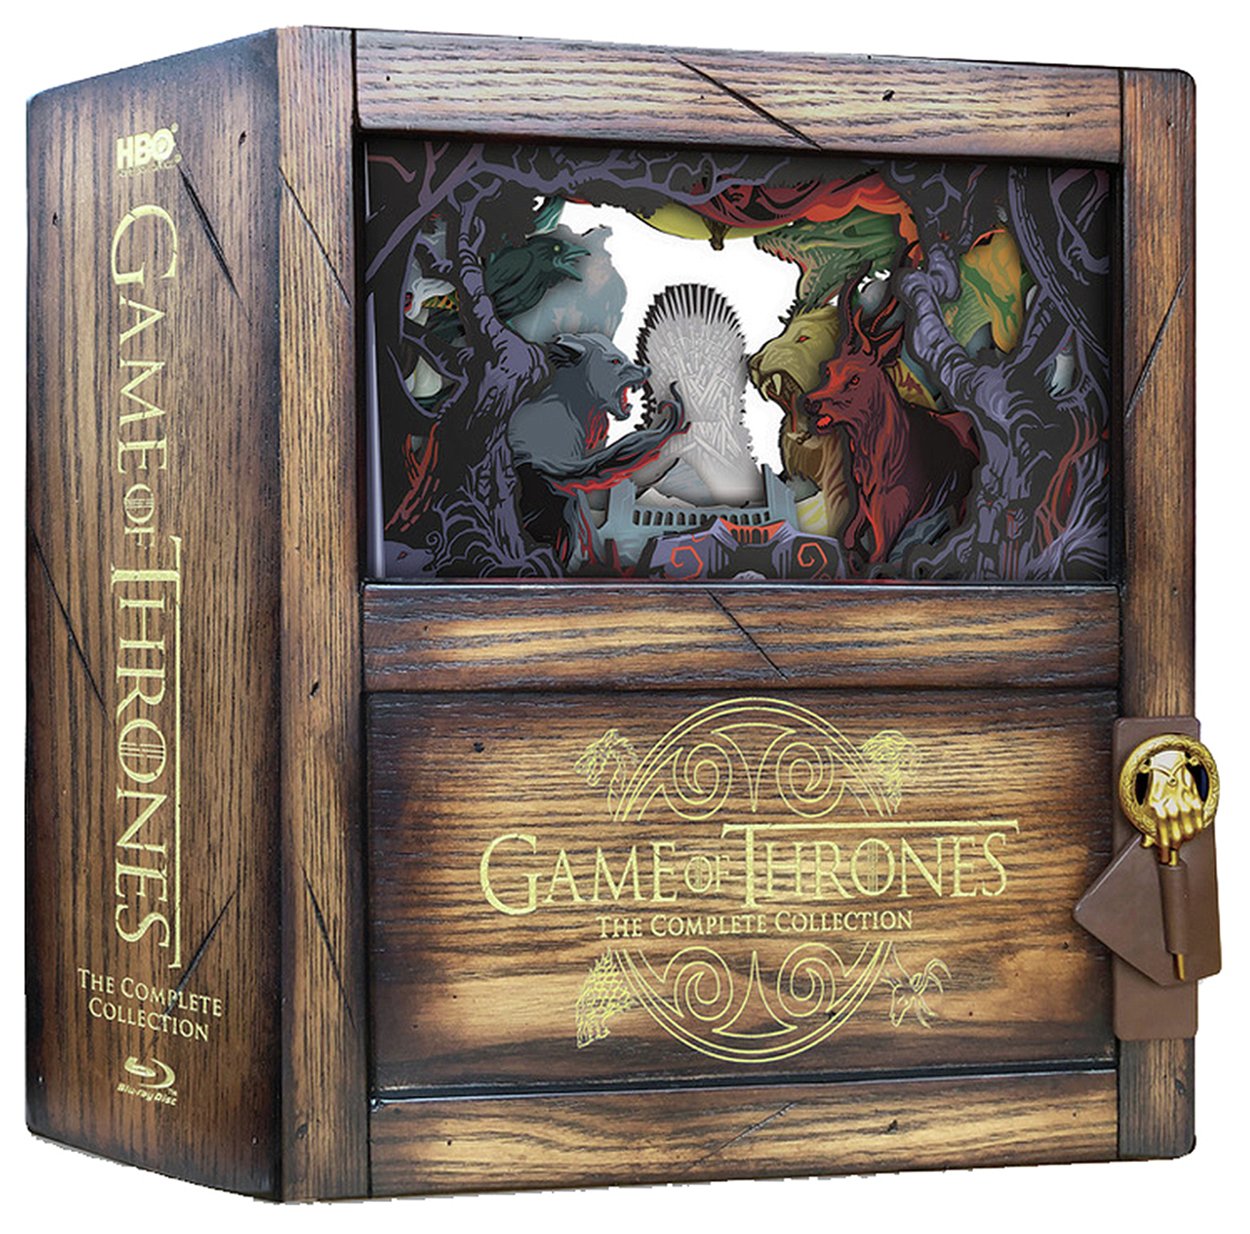 Game of Thrones The Complete Collectors Edn Blu-ray Box Set